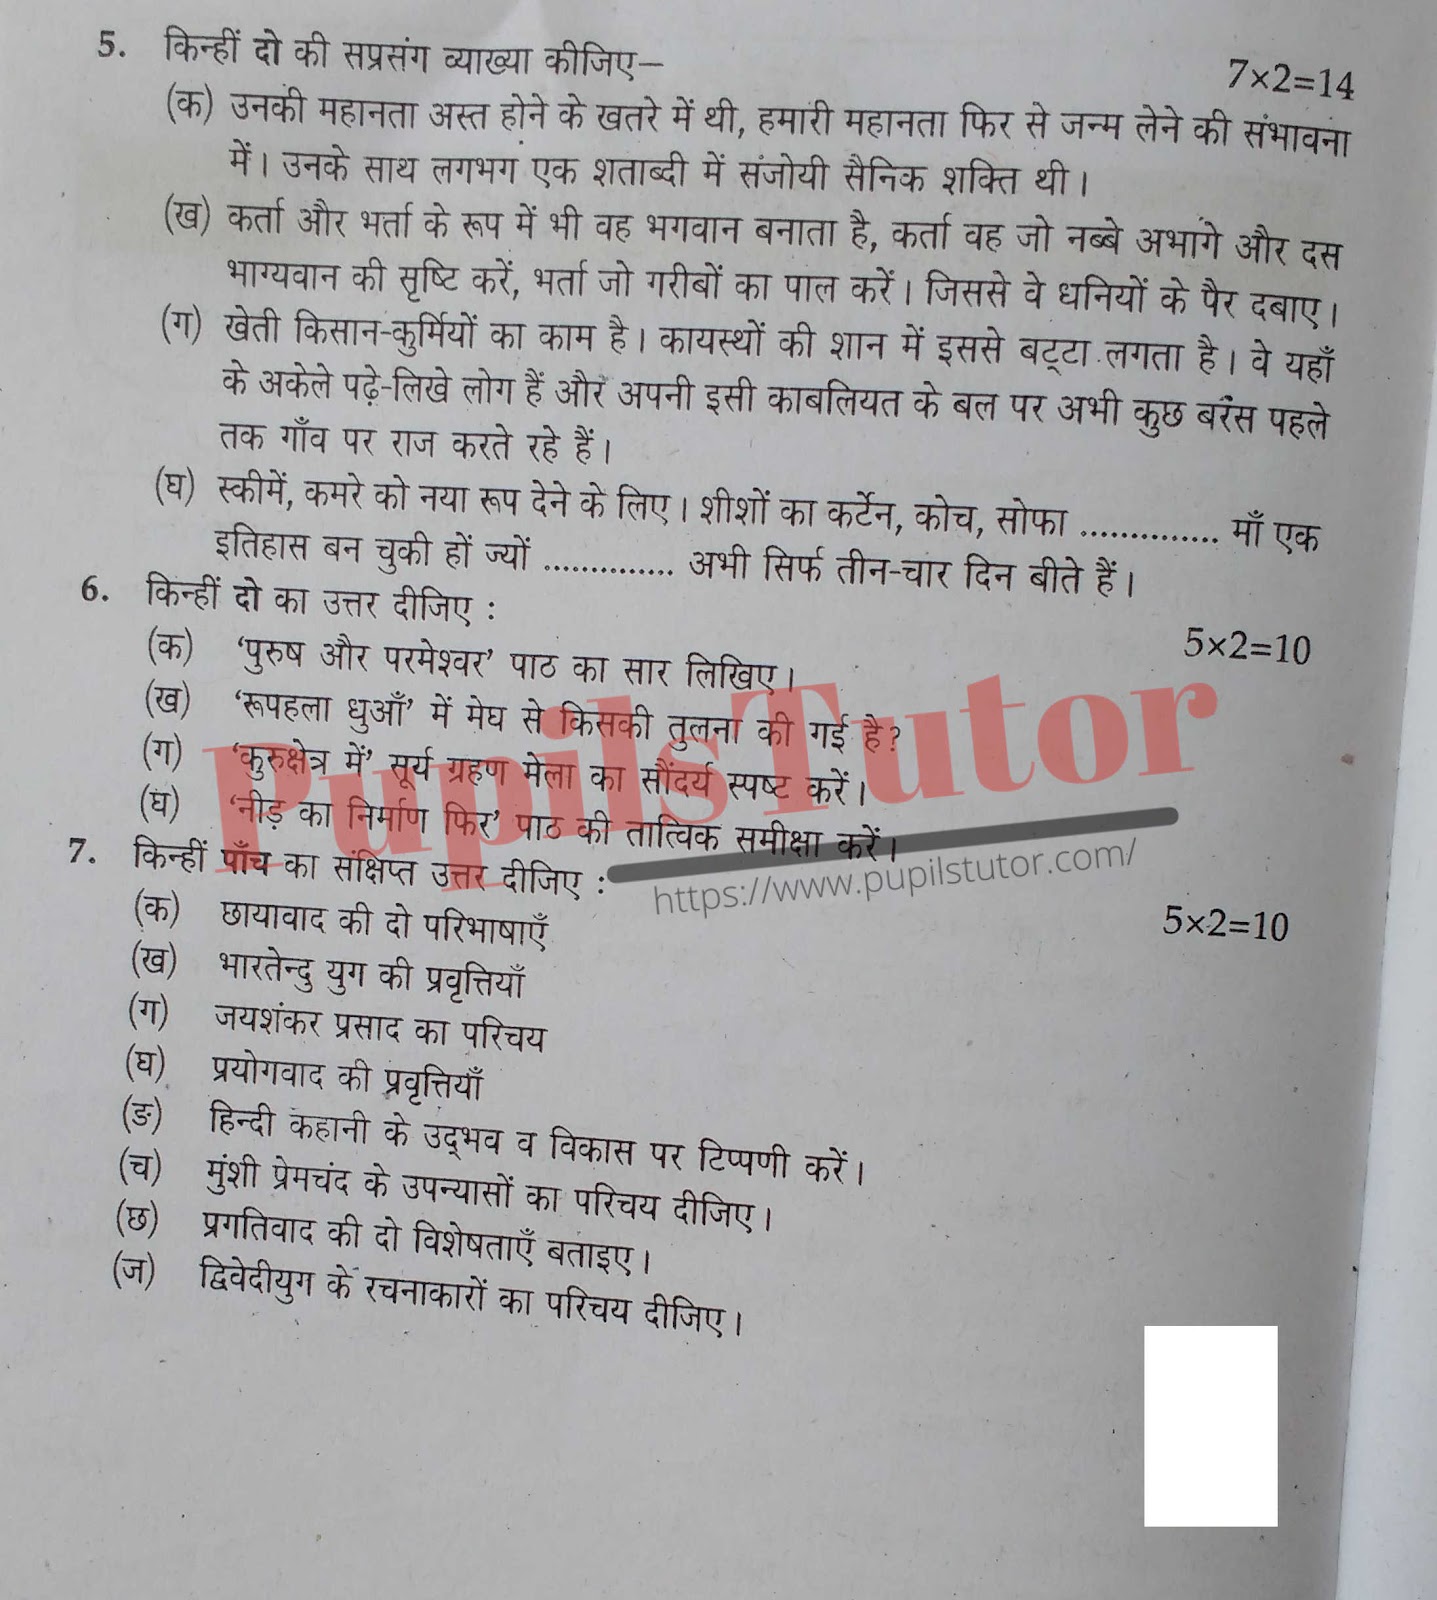 M.D. University B.A. Hindi (Compulsory) Second Year Important Question Answer And Solution - www.pupilstutor.com (Paper Page Number 2)